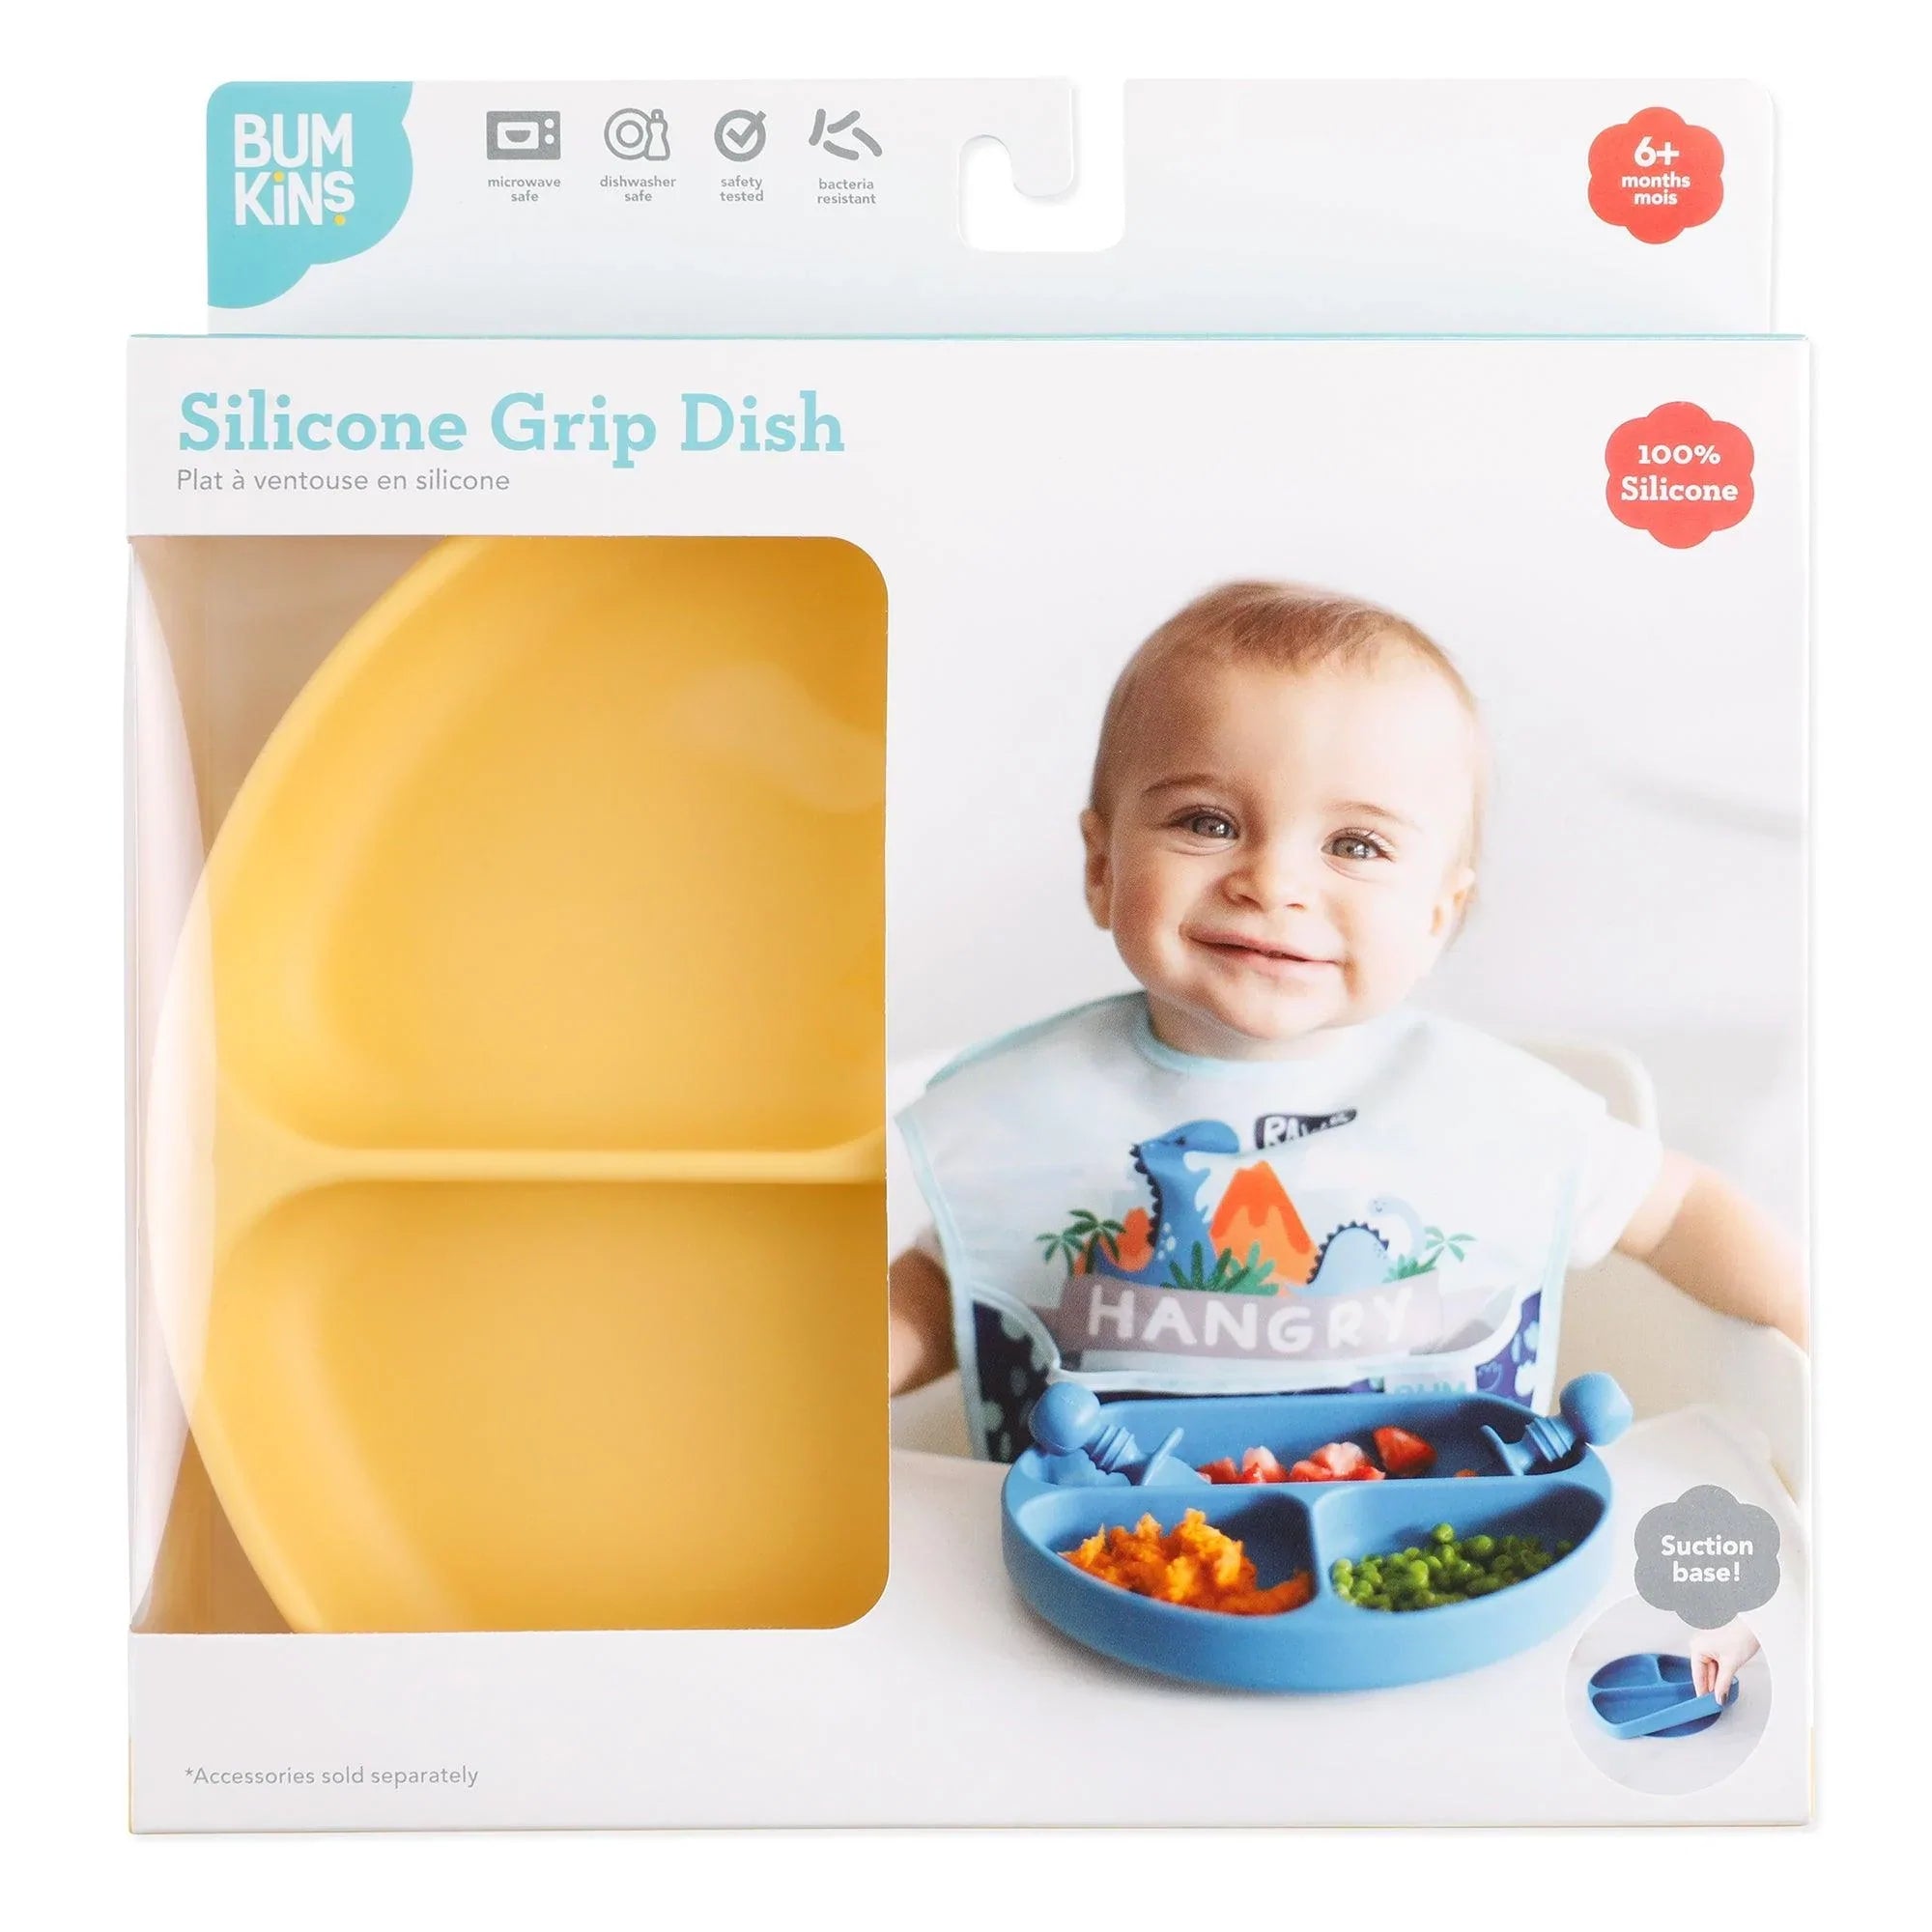 Bumkins Silicone Sensory Placemat, Baby Ages 6 Mos+ (Sage), Green